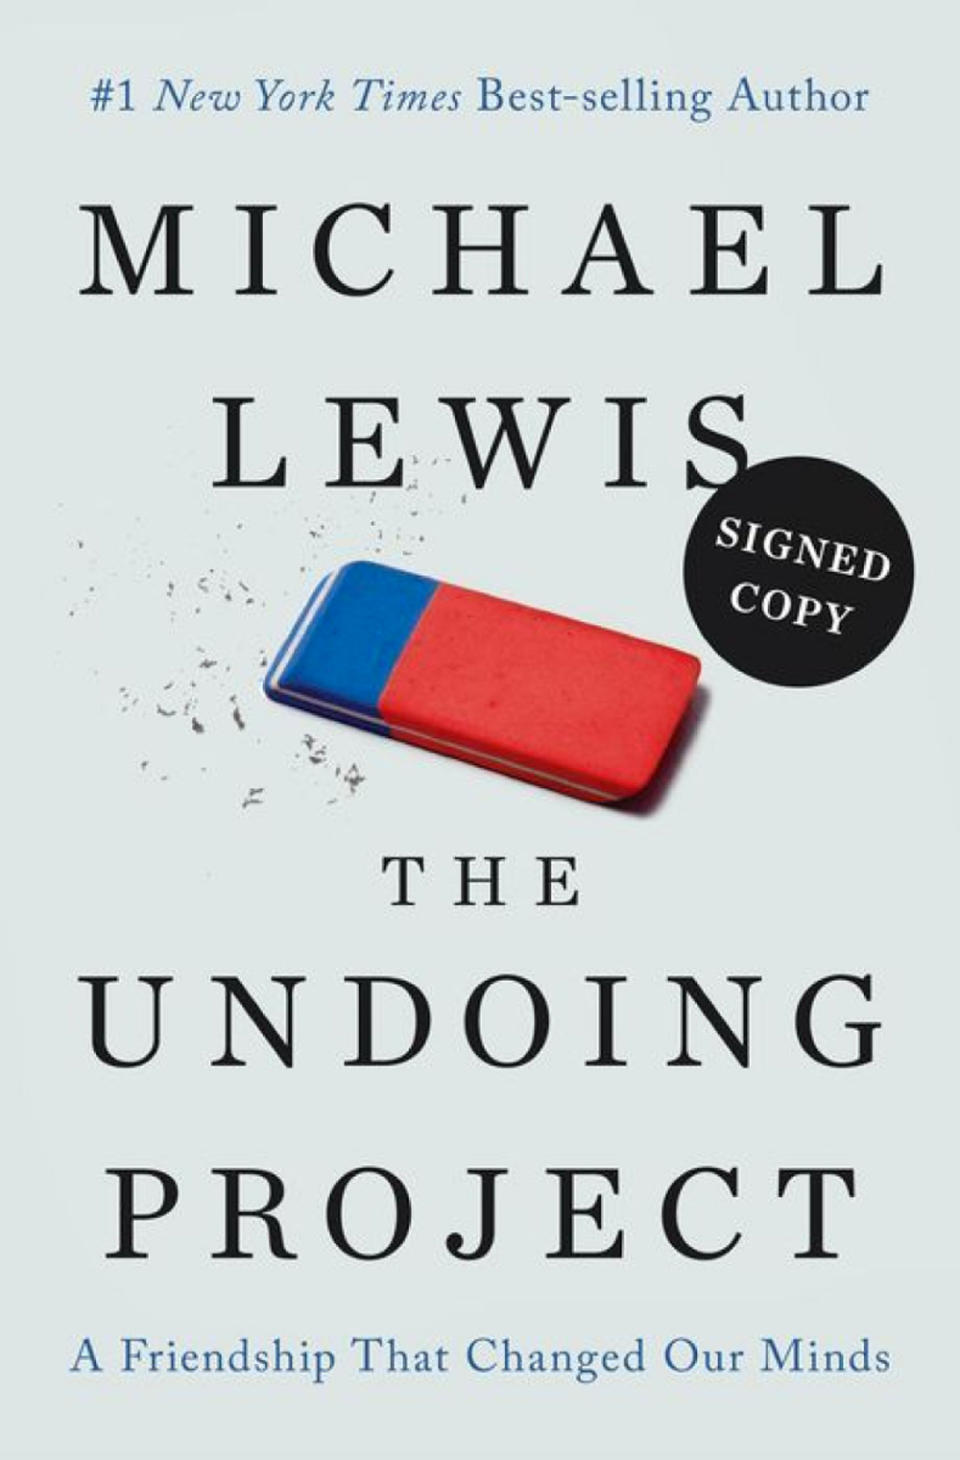 The Undoing Project  by Michael Lewis